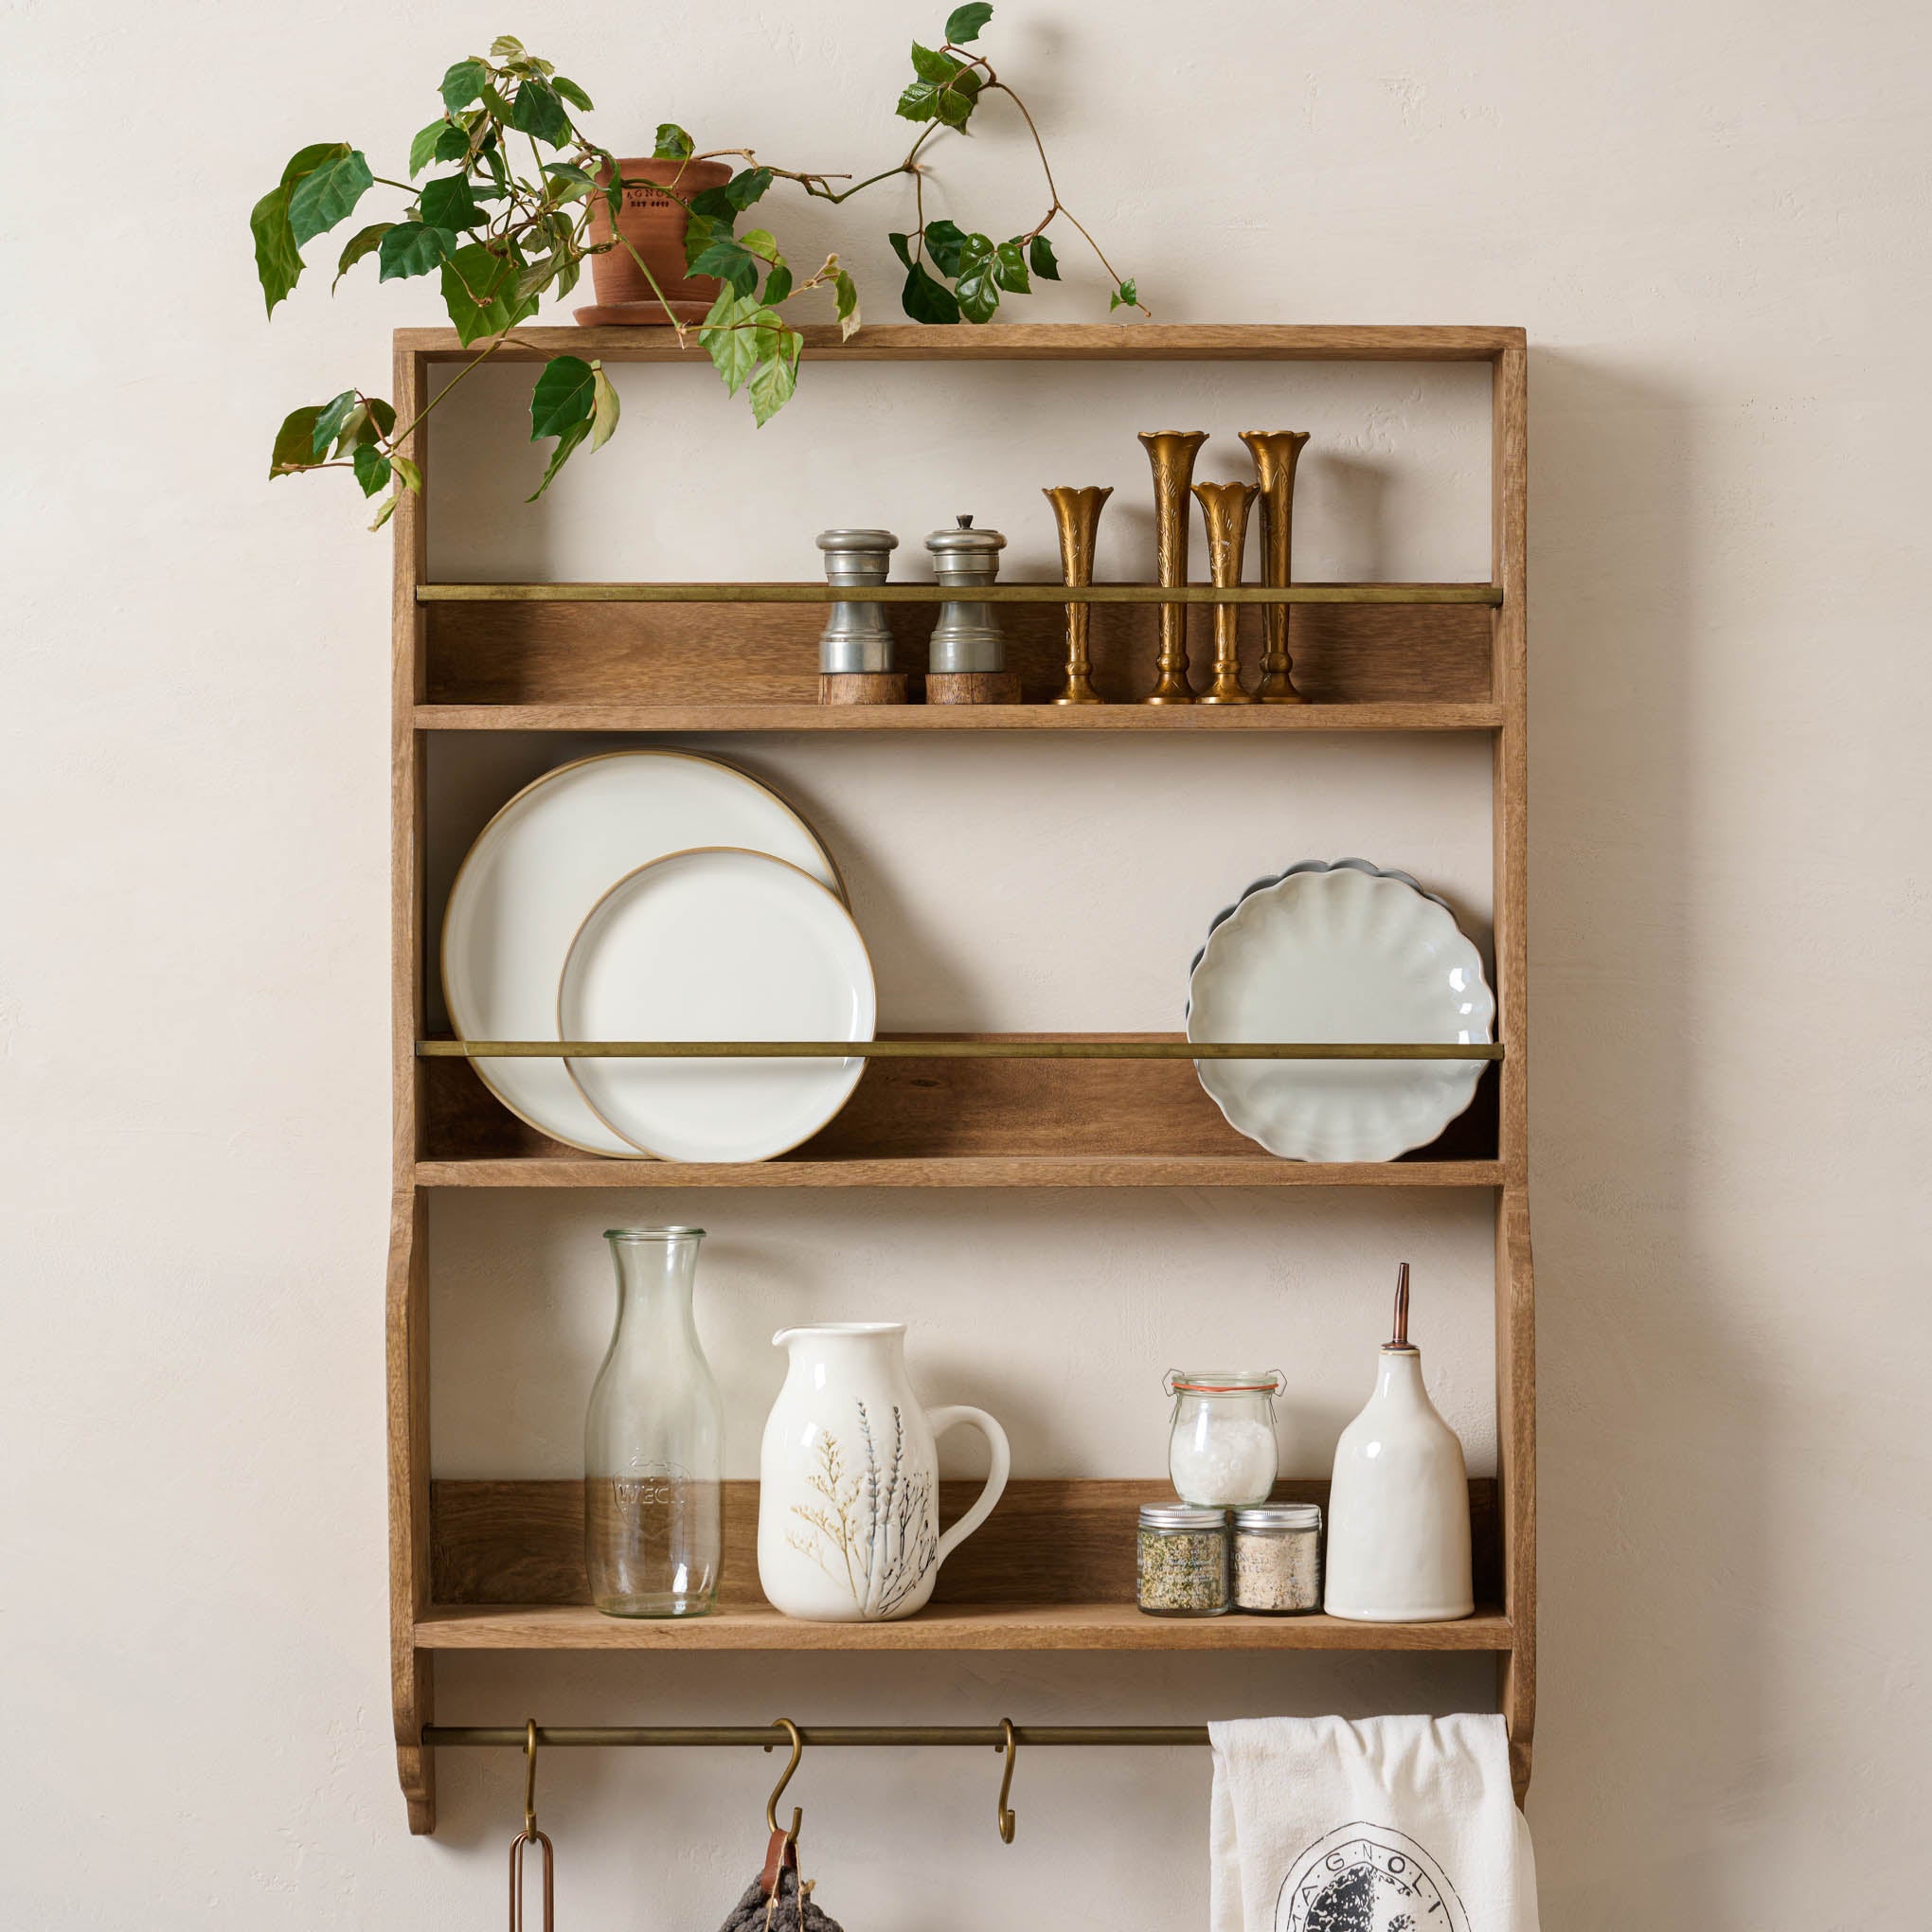 Hannon Wood and Brass Display Shelf with spring kitchen items on shelves